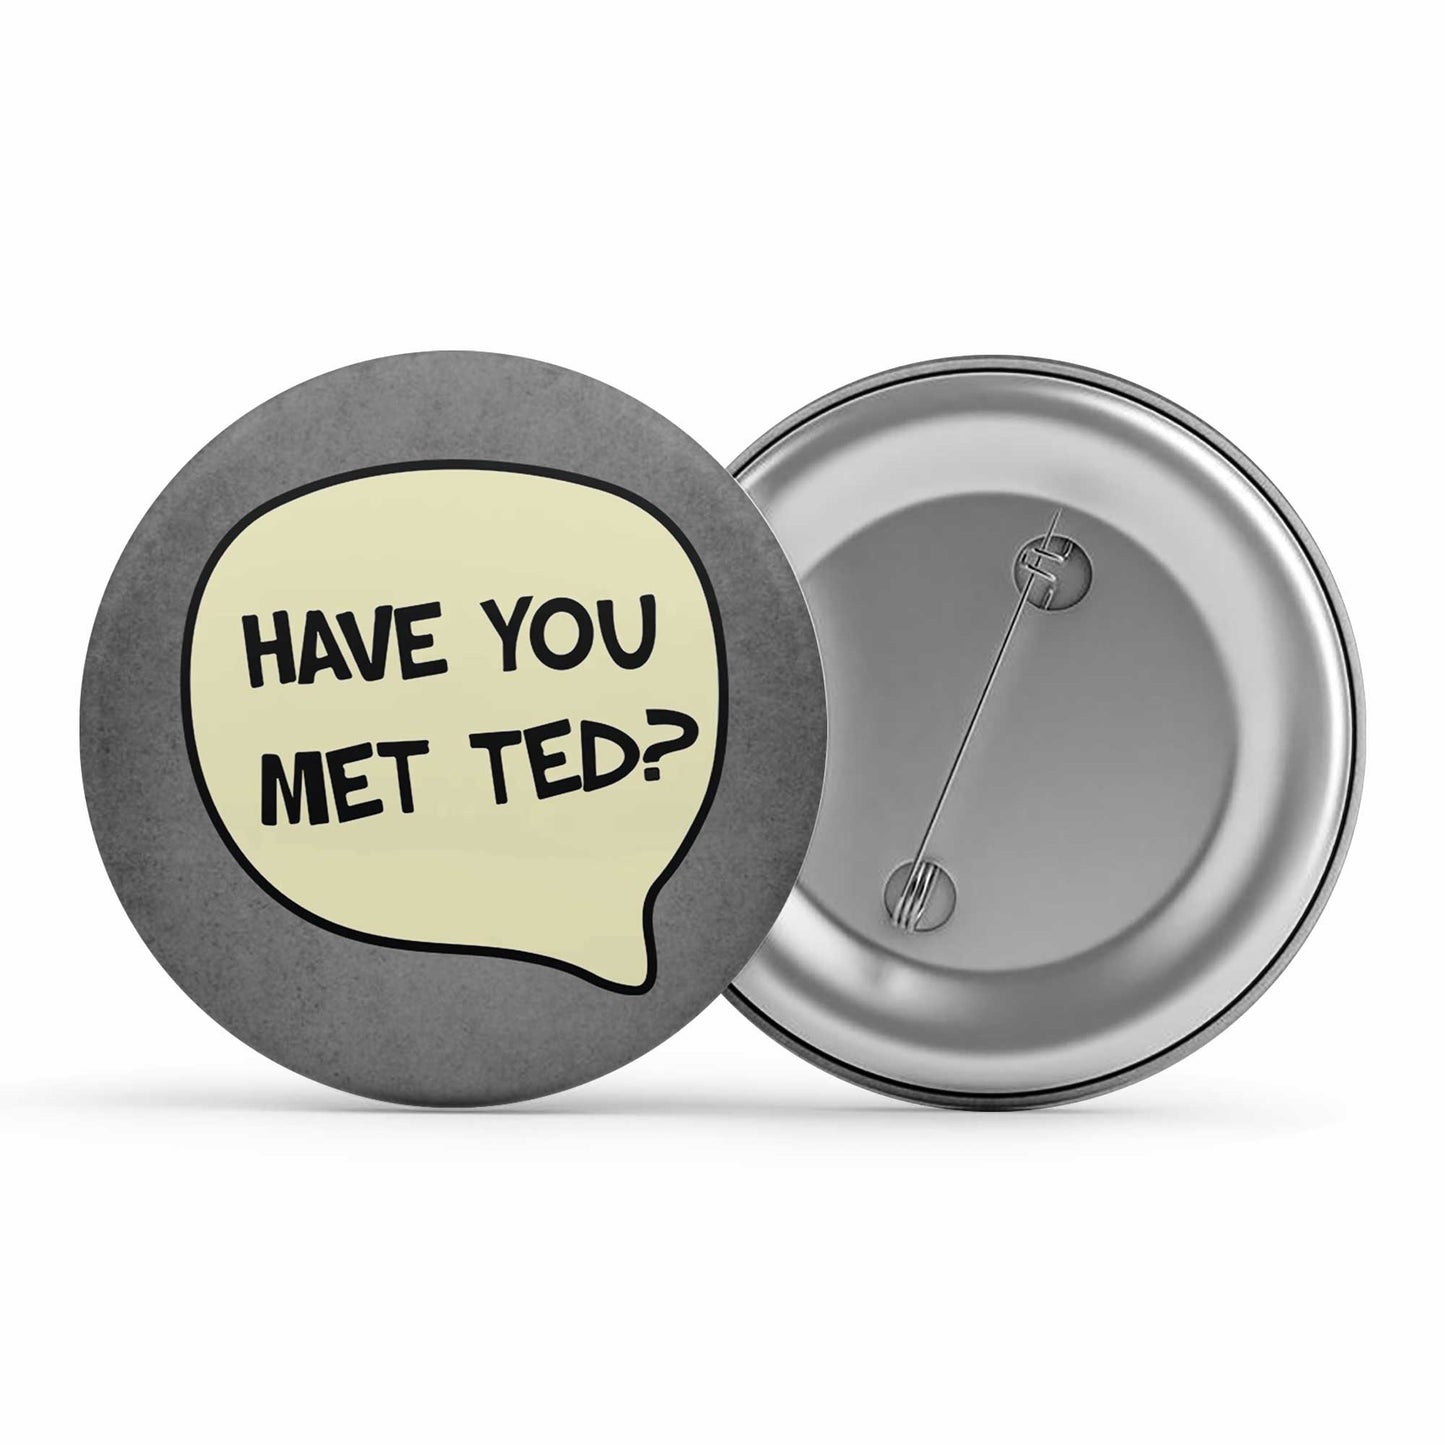 How I Met Your Mother Badge - Have You Met Ted Metal Pin Button The Banyan Tee TBT